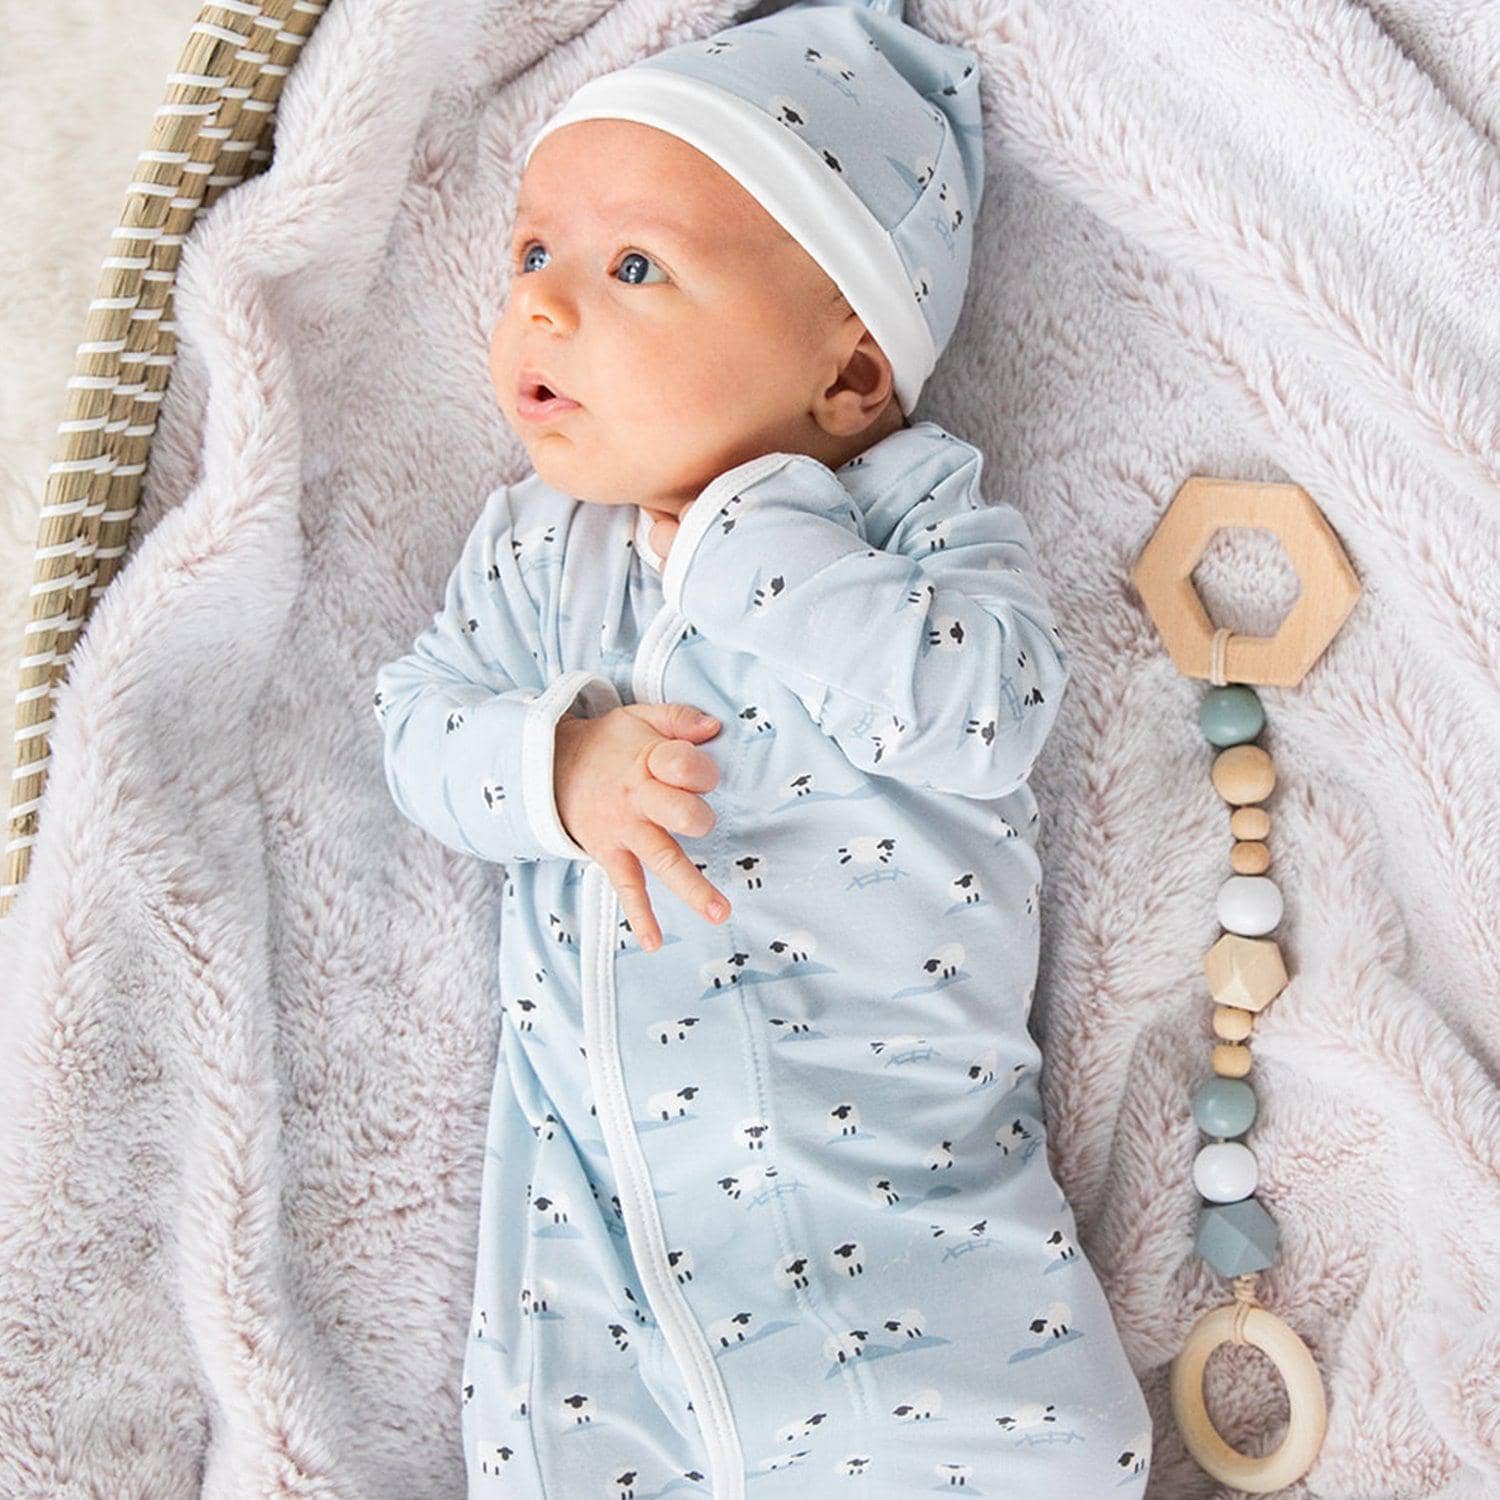 Magnetic Me Modal Infant Sack Gown & Hat Set - Baa Baa Baby, Blue Lifestyle